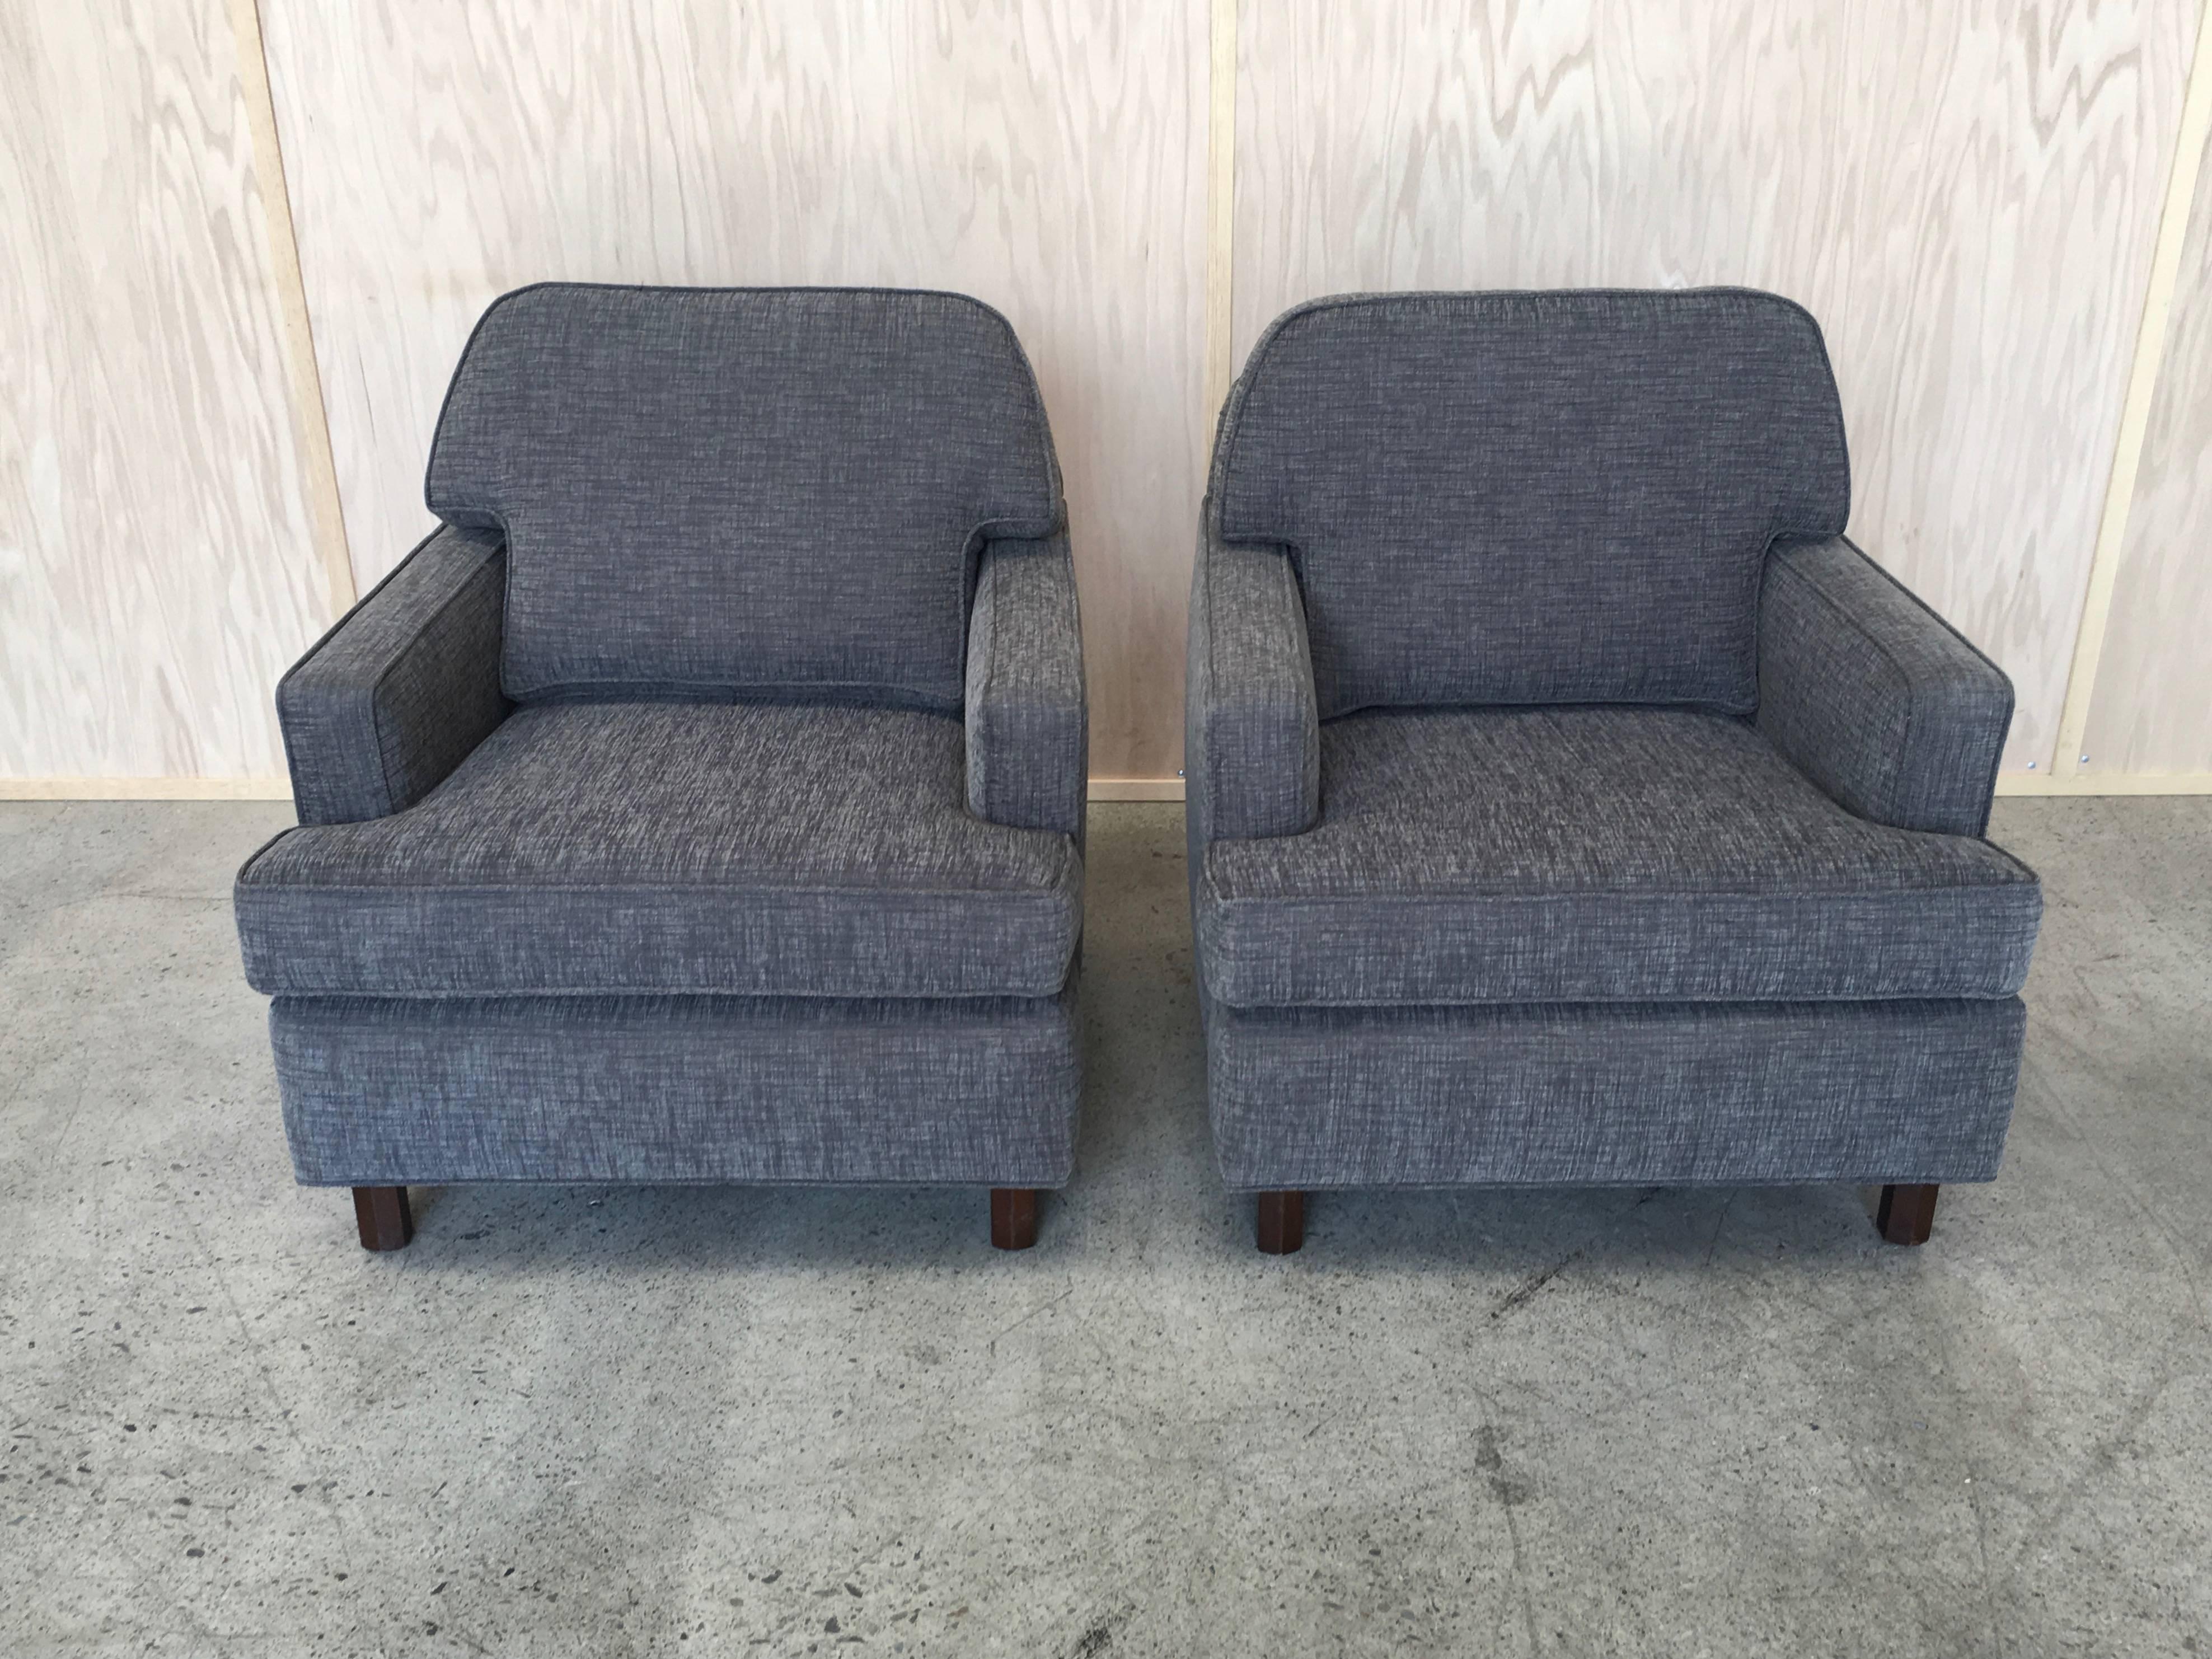 Edward Wormley for Dunbar pair of lounge chairs.